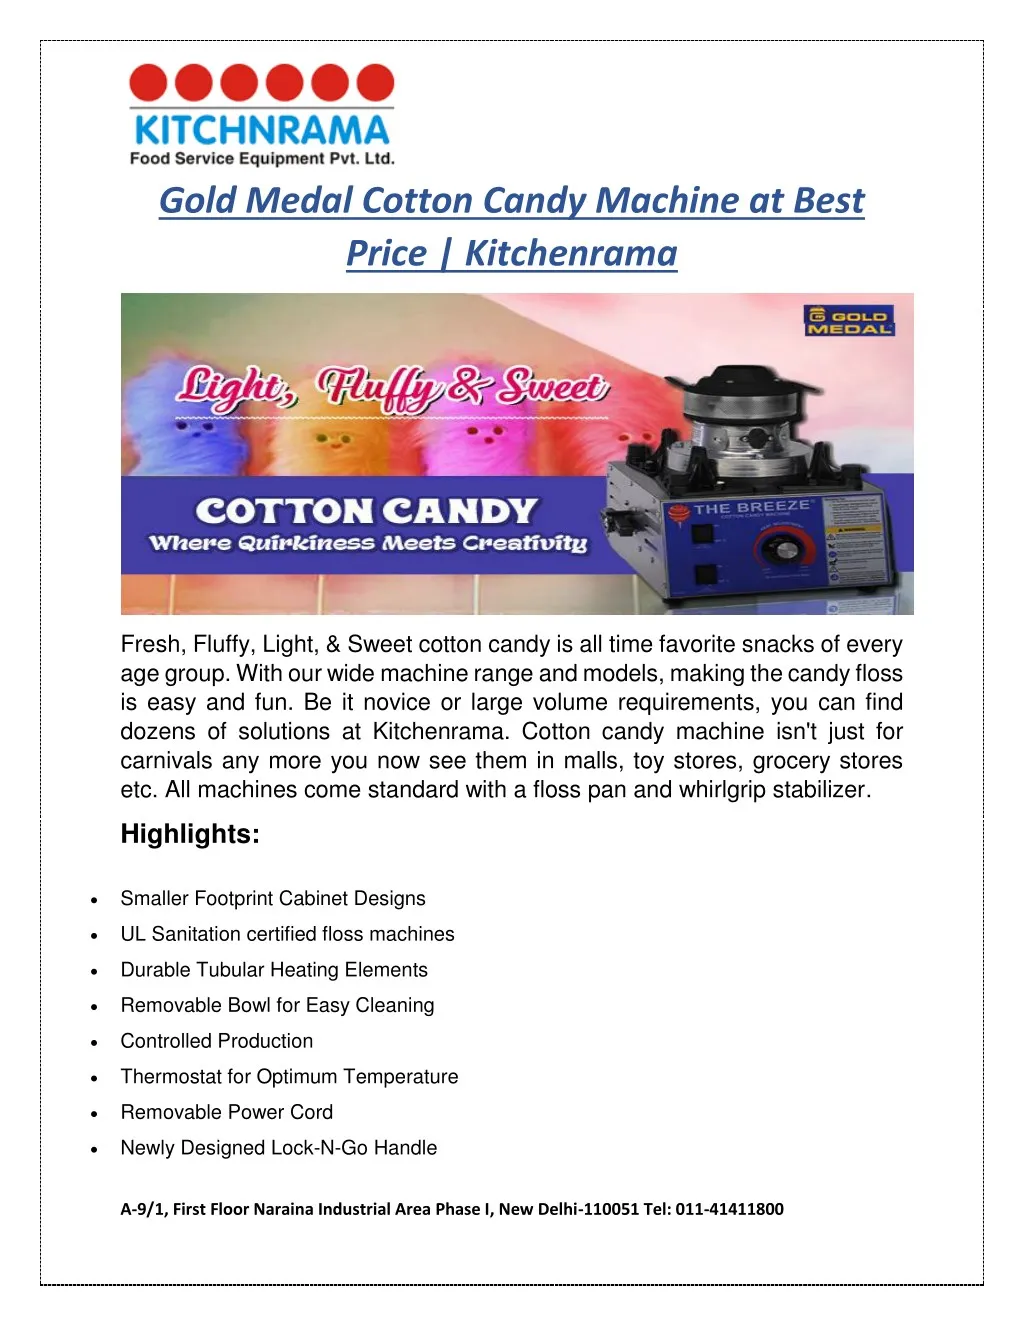 gold medal cotton candy machine at best price